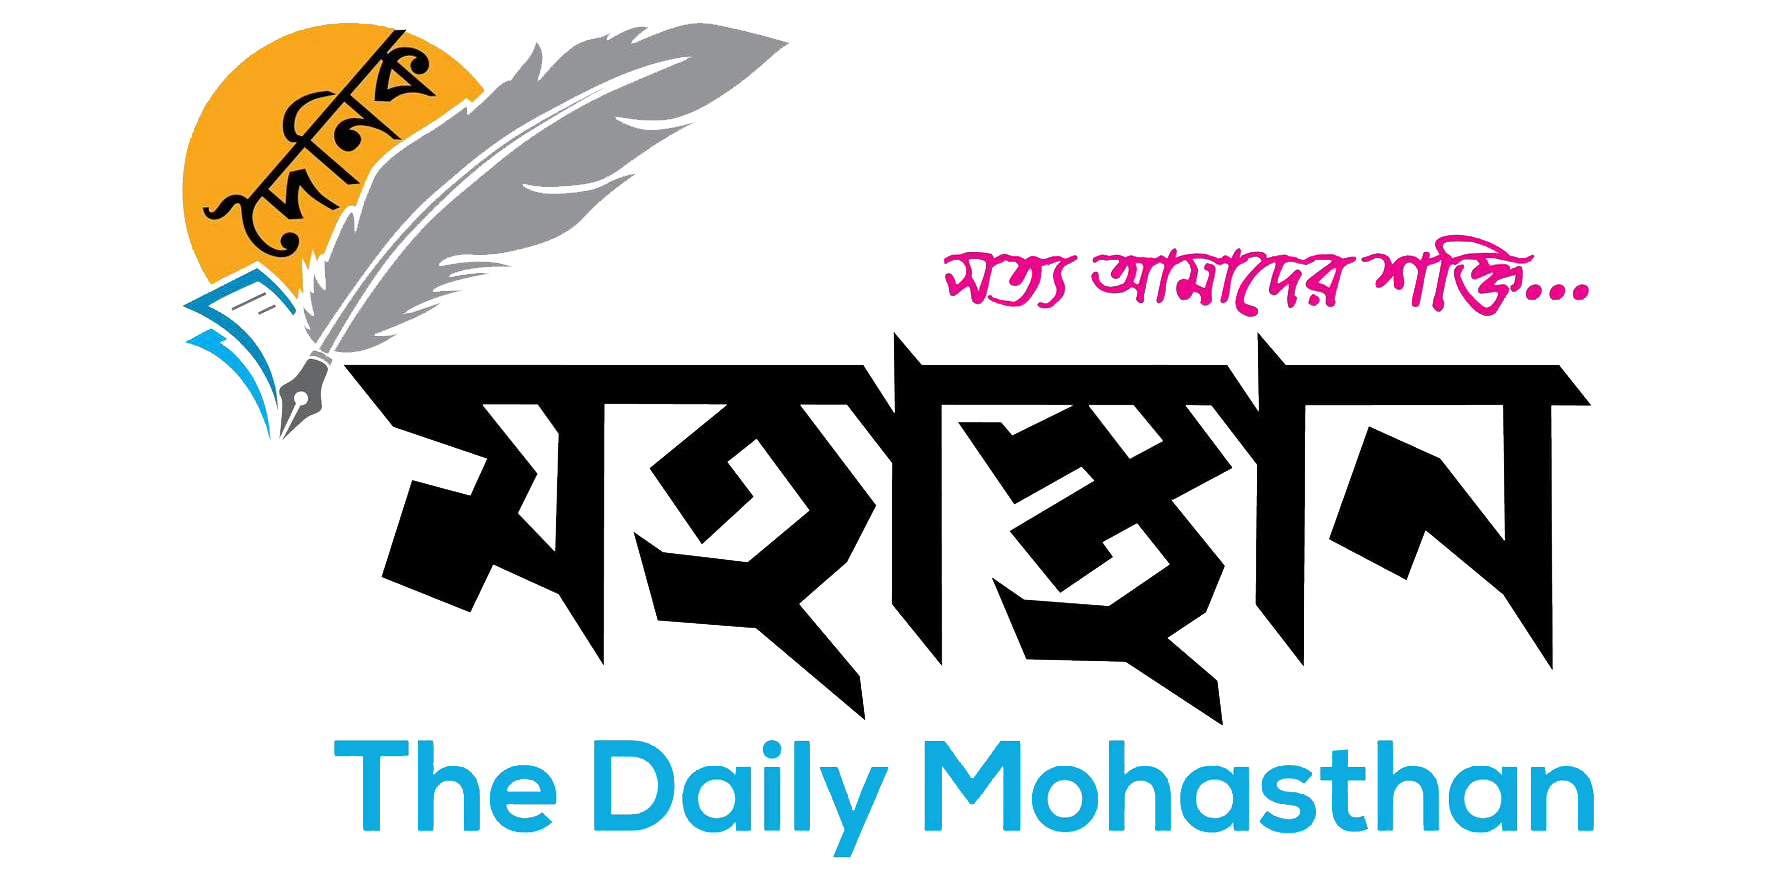 Daily Mohasthan